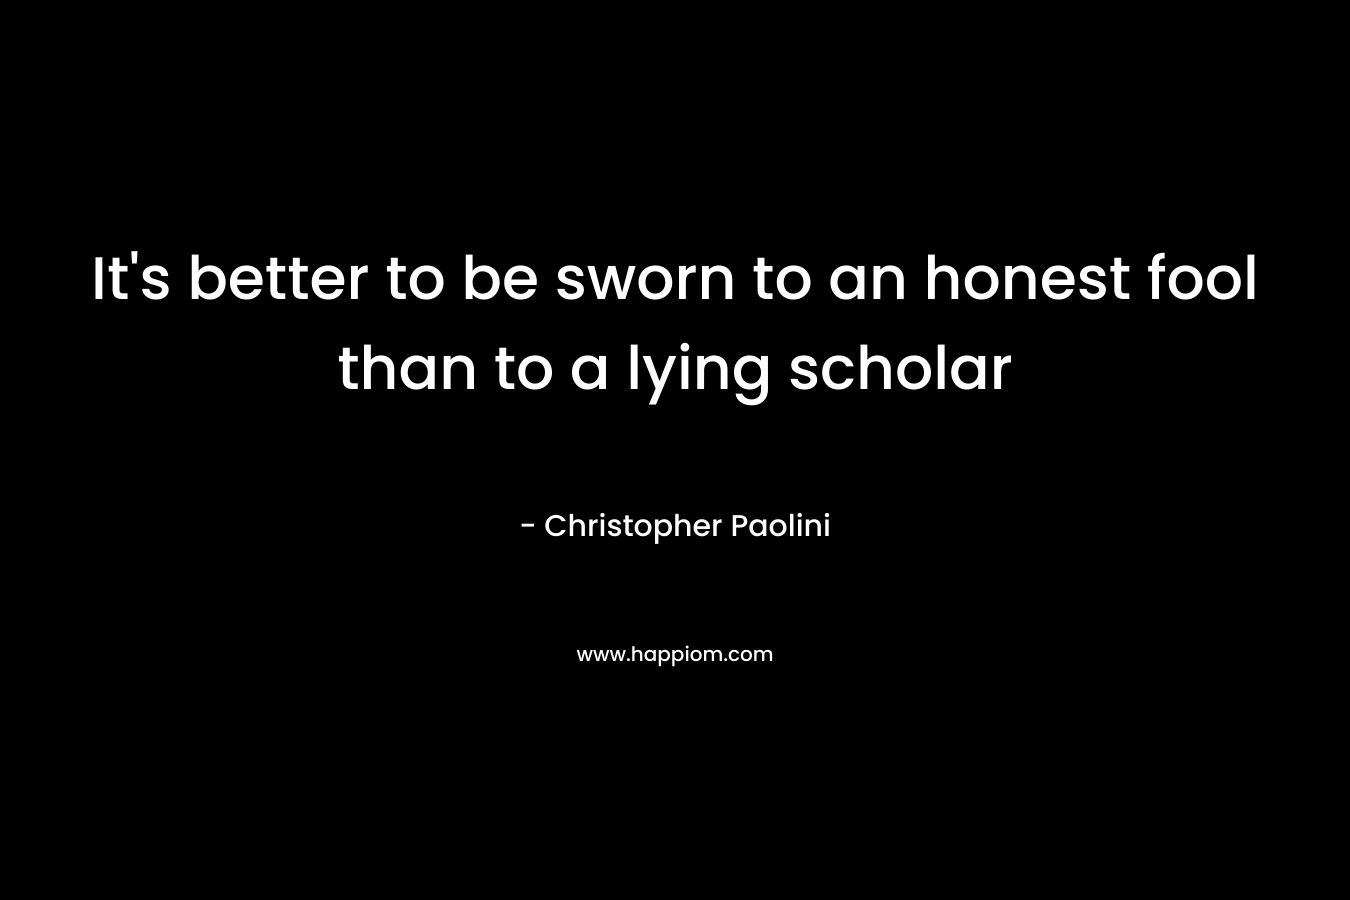 It's better to be sworn to an honest fool than to a lying scholar